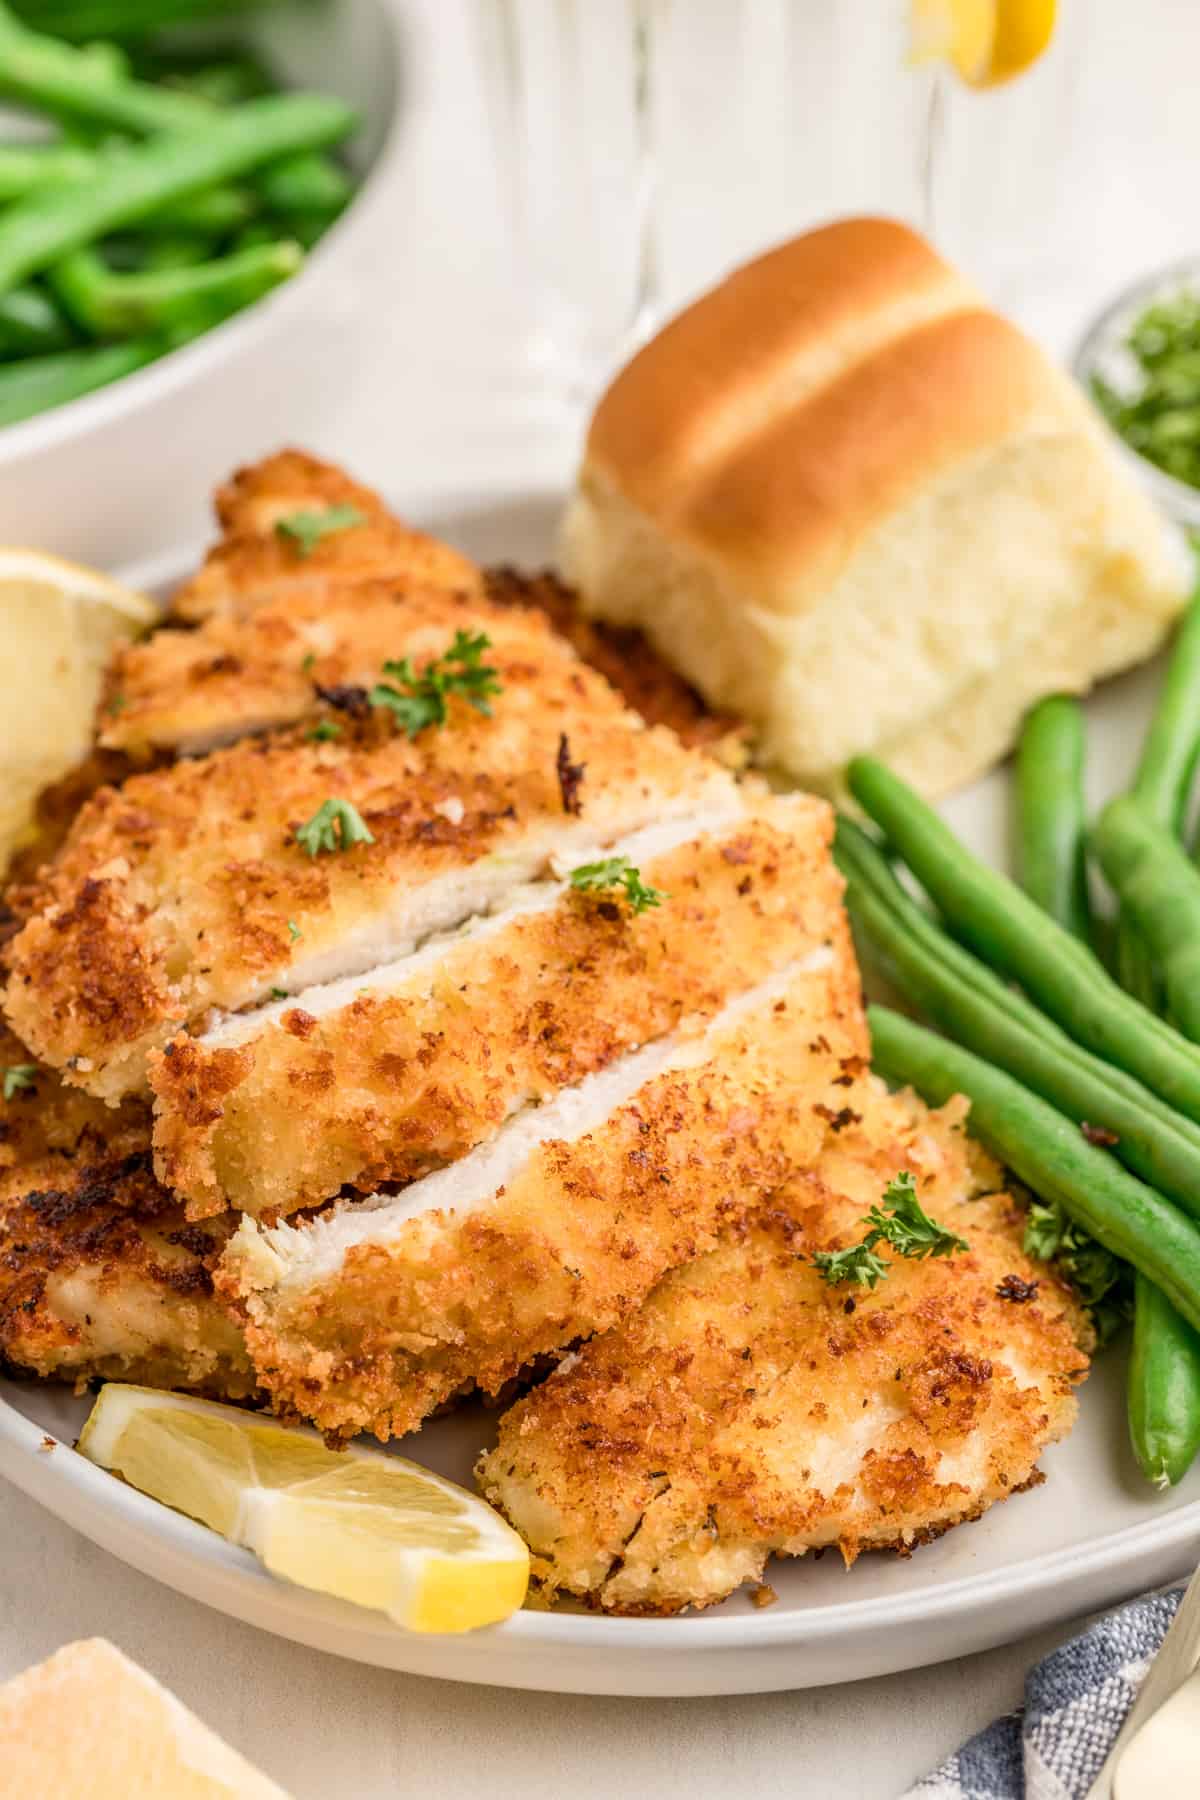 Cut up Parmesan Crusted Chicken on white plate with green beans, bread and lemon slice.